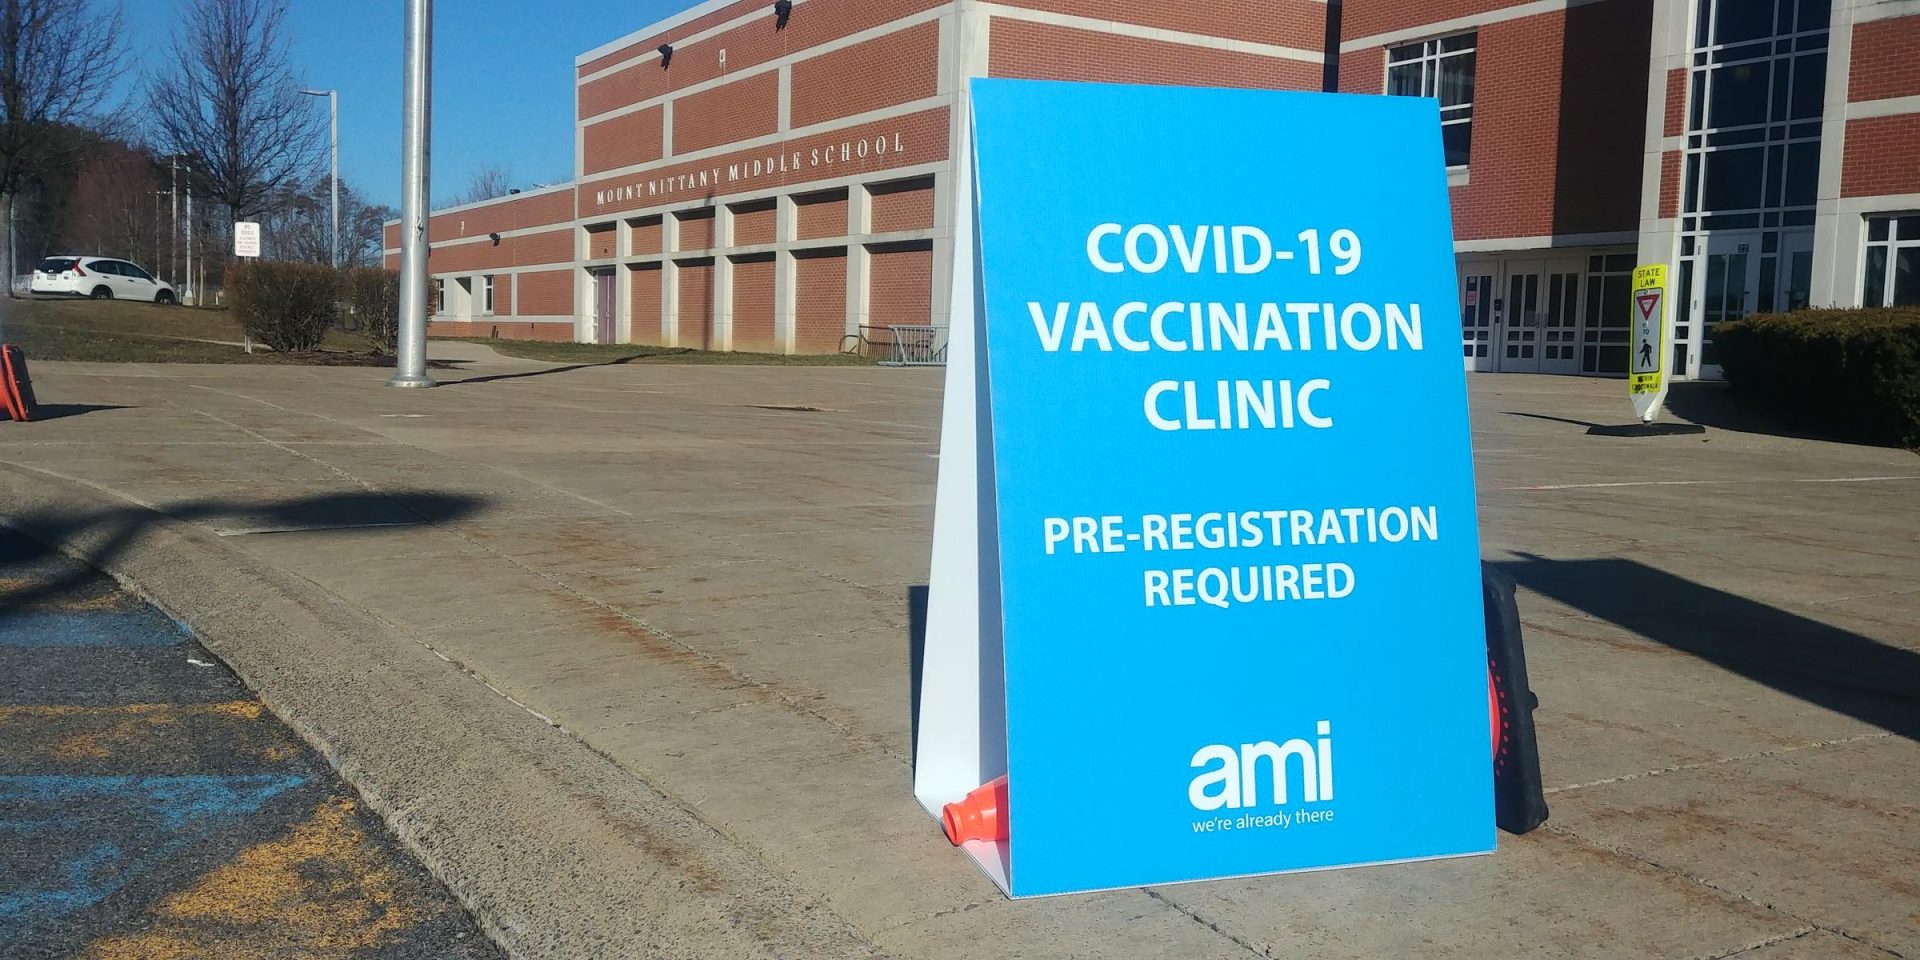 Saturday kicked off the first day of the four day COVID-19 vaccination clinic hosted by the Central Intermediate Unit 10.